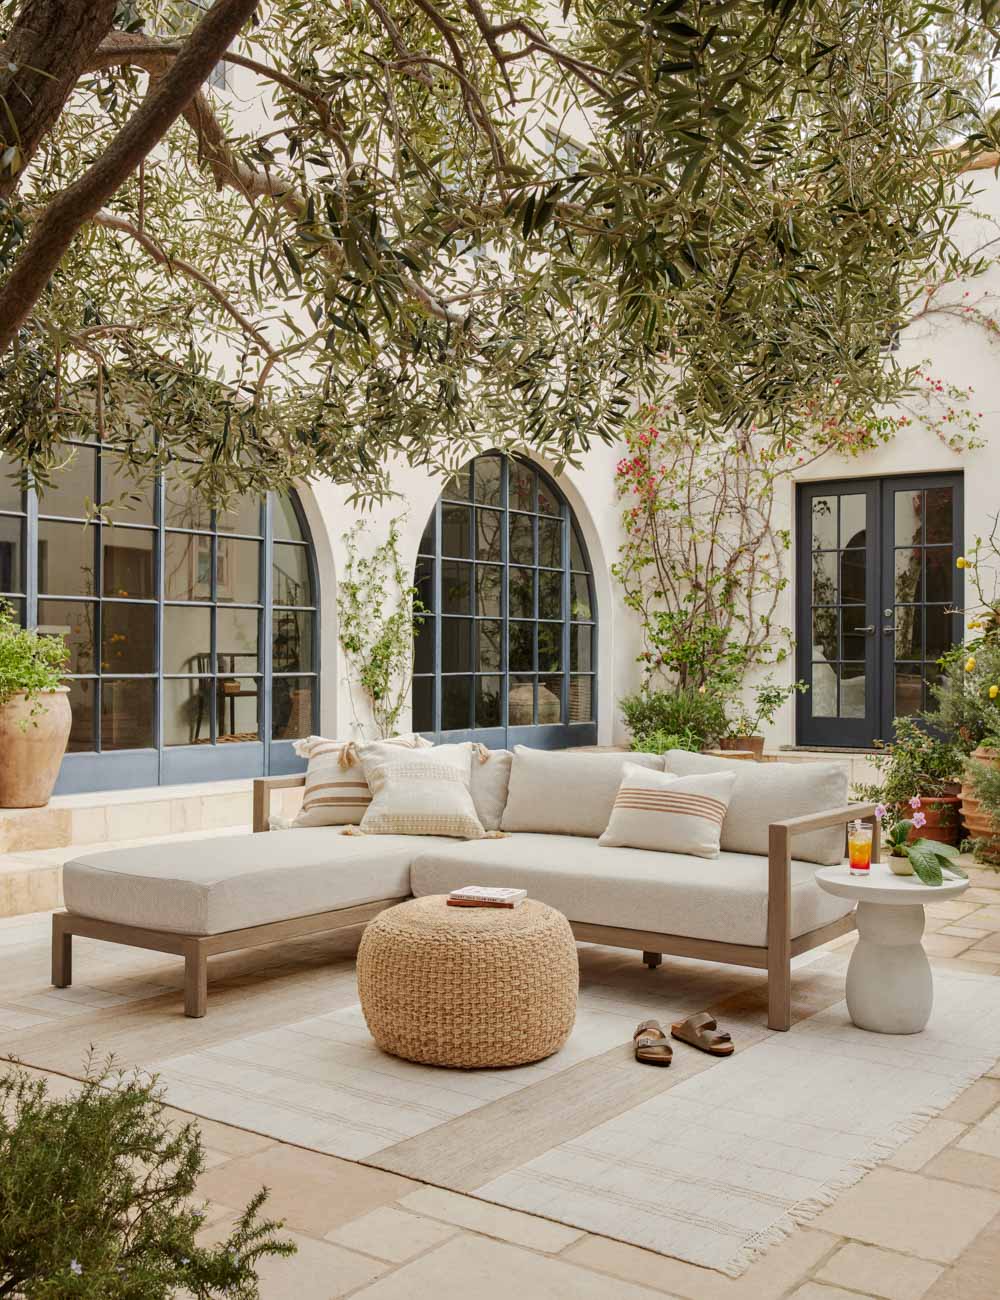 19 High-End Furniture Stores With the Most Gorgeous Decor